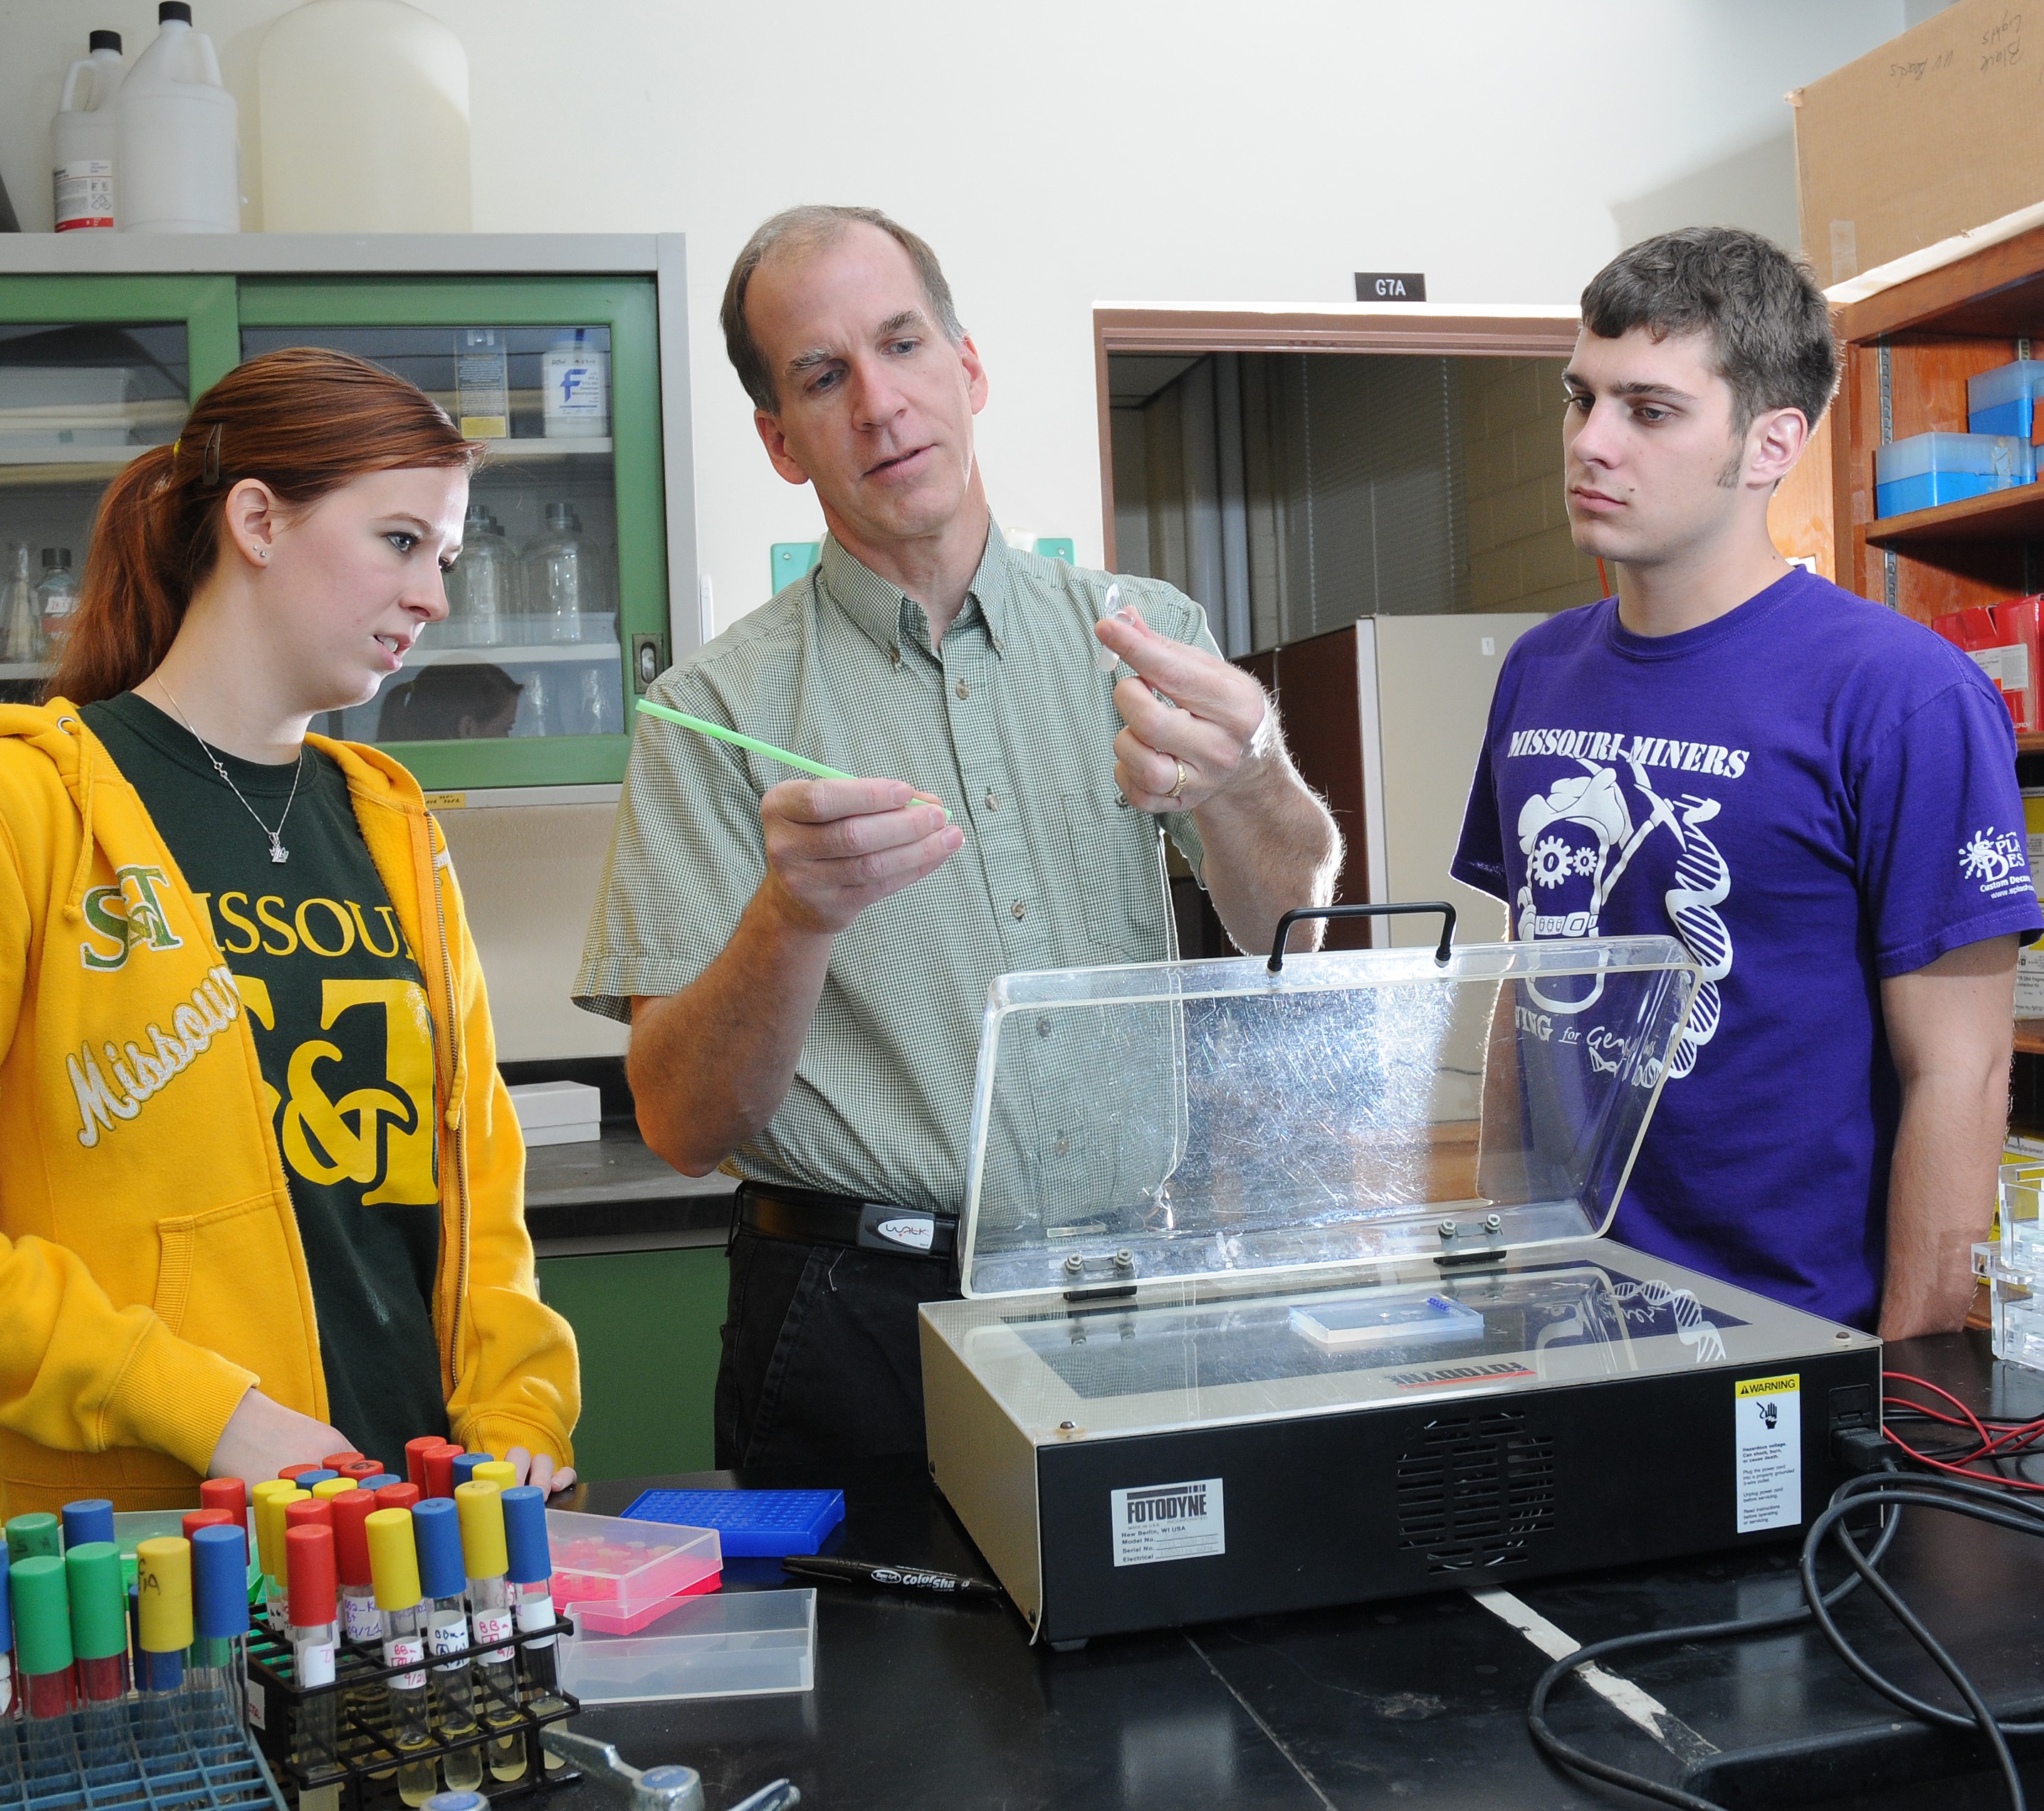 Dr. David Westenberg holding a tube and two students standing beside him, one in a yellow shirt and one in a purple shirt.